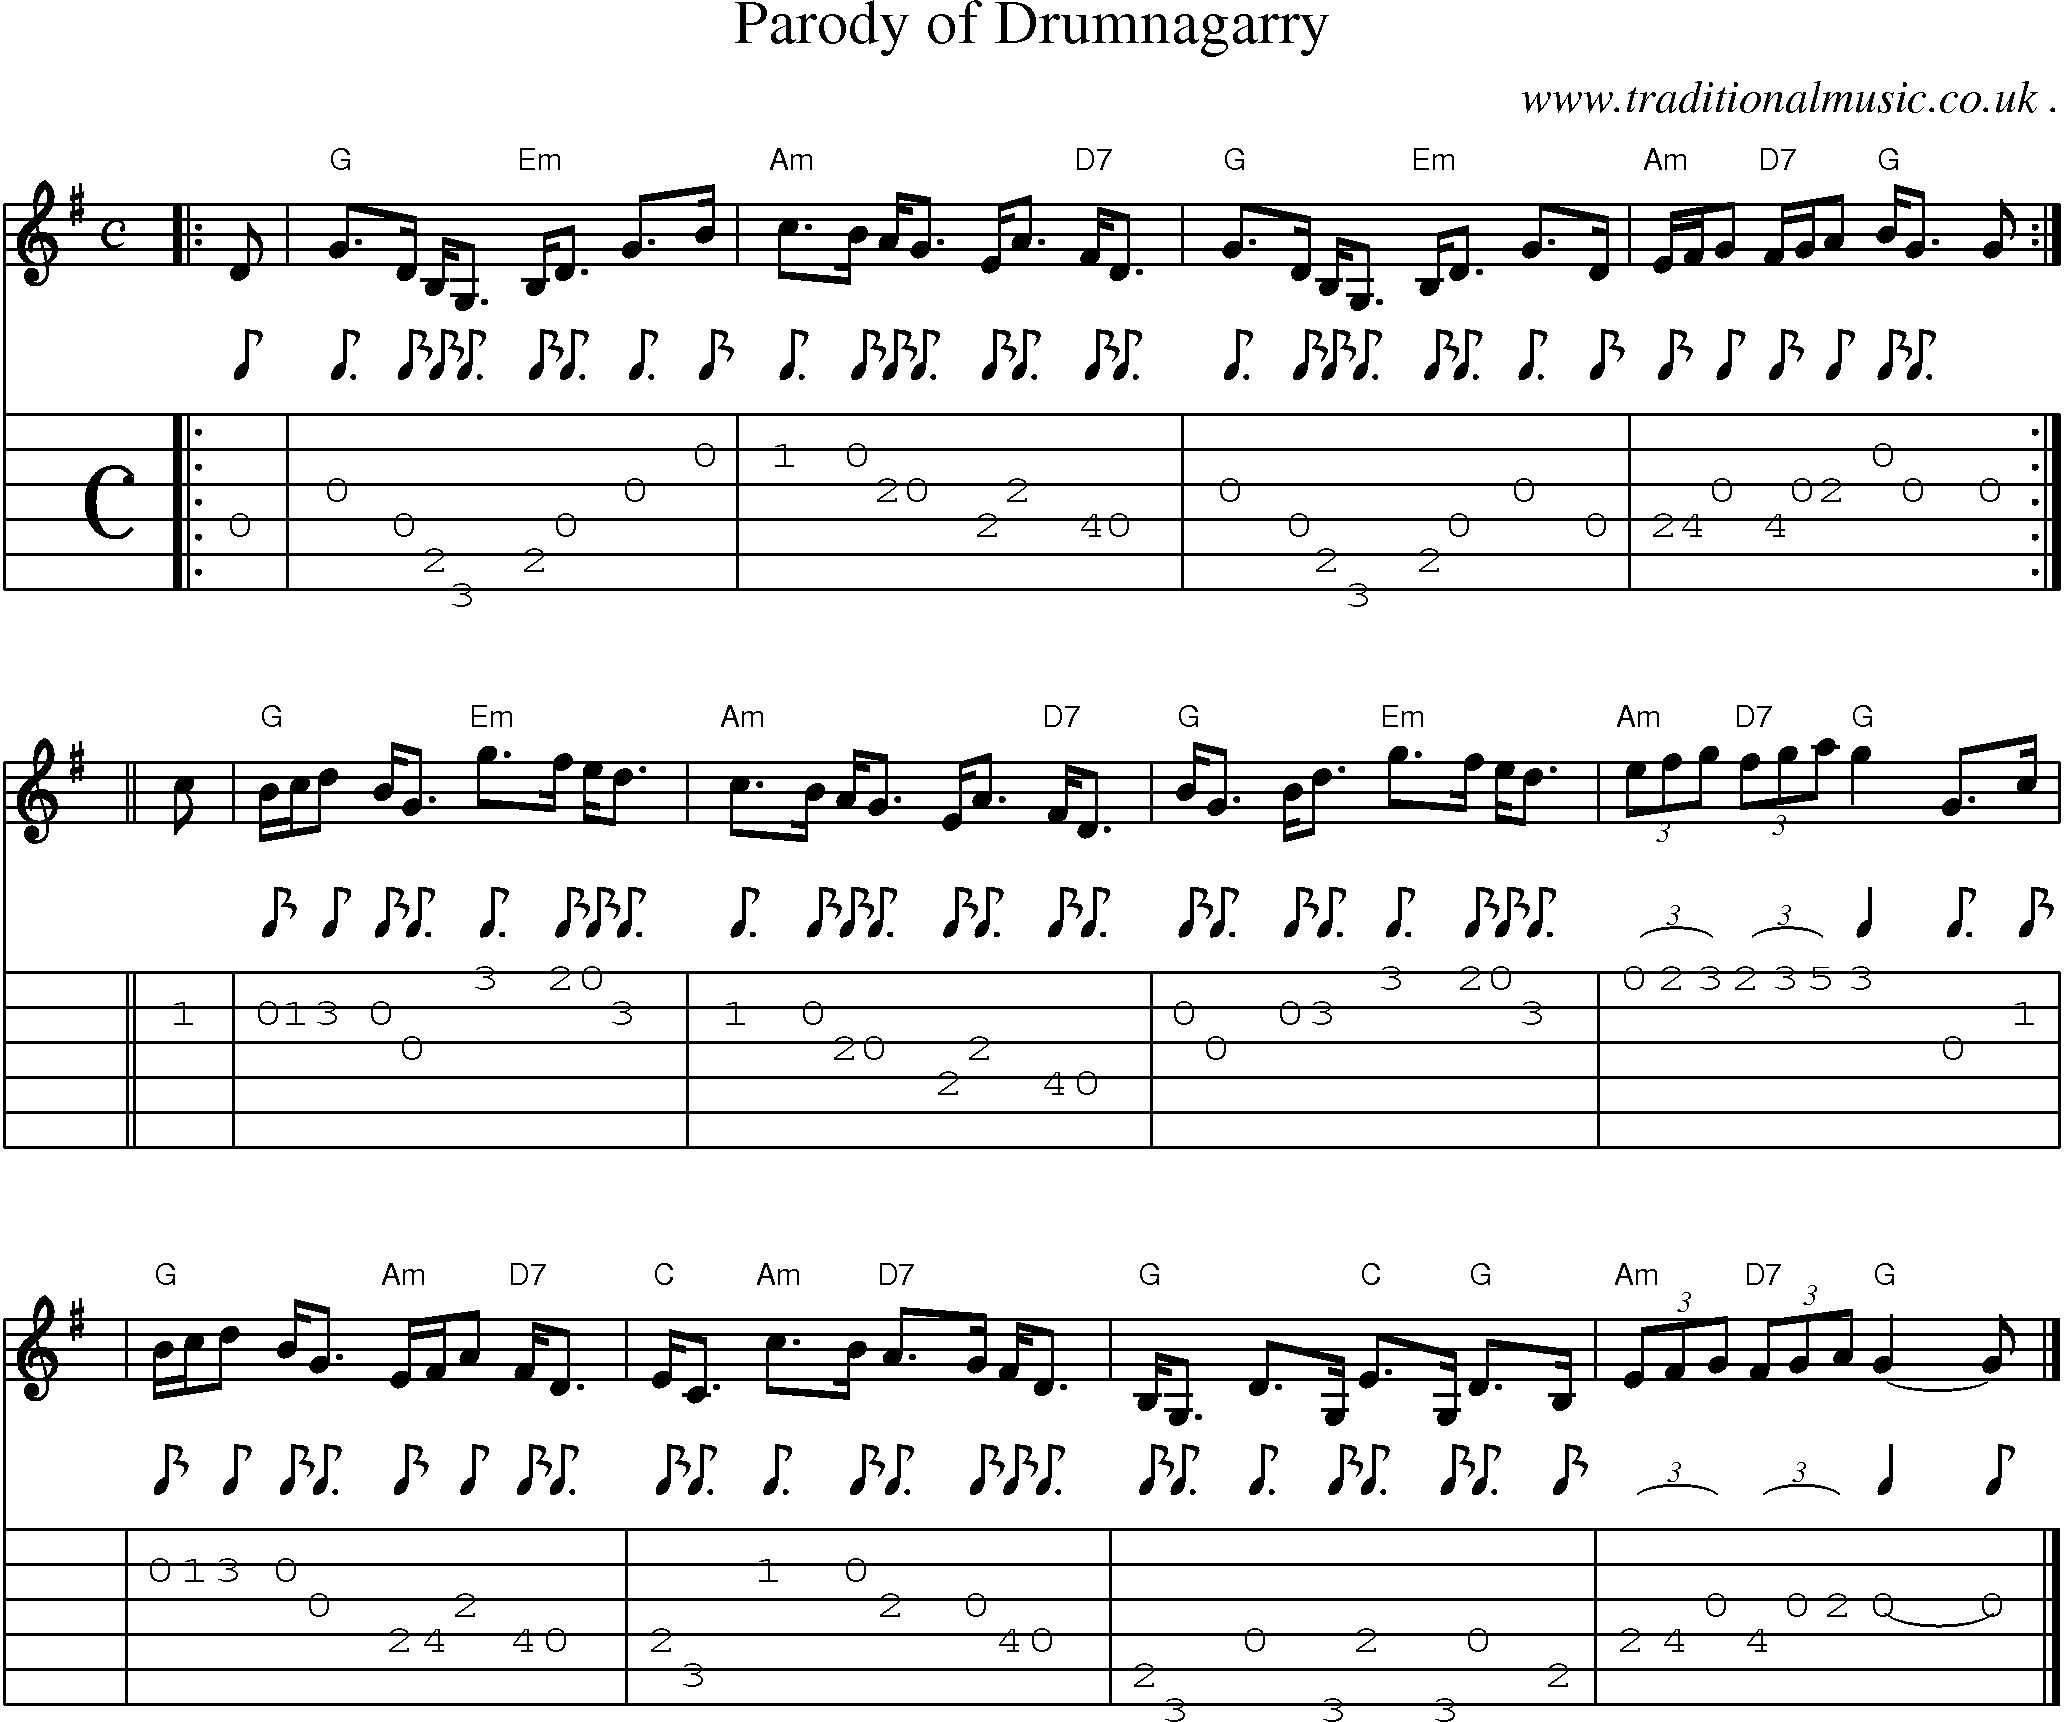 Sheet-music  score, Chords and Guitar Tabs for Parody Of Drumnagarry